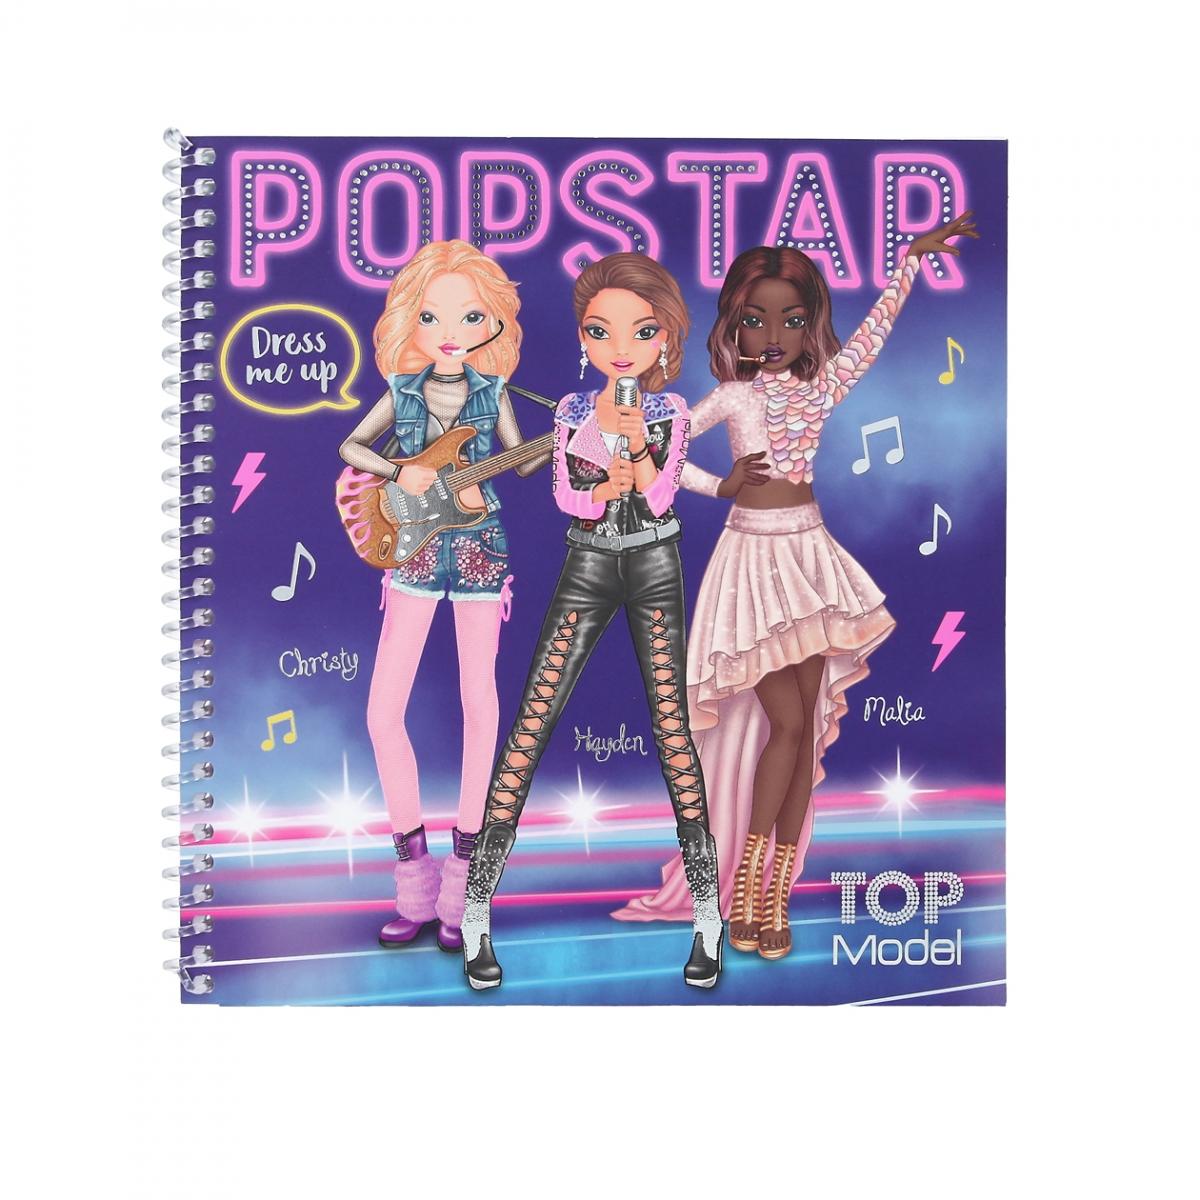 Depesche TOPModel Ballet Dress Me Up Stickerbook with 24 Pages